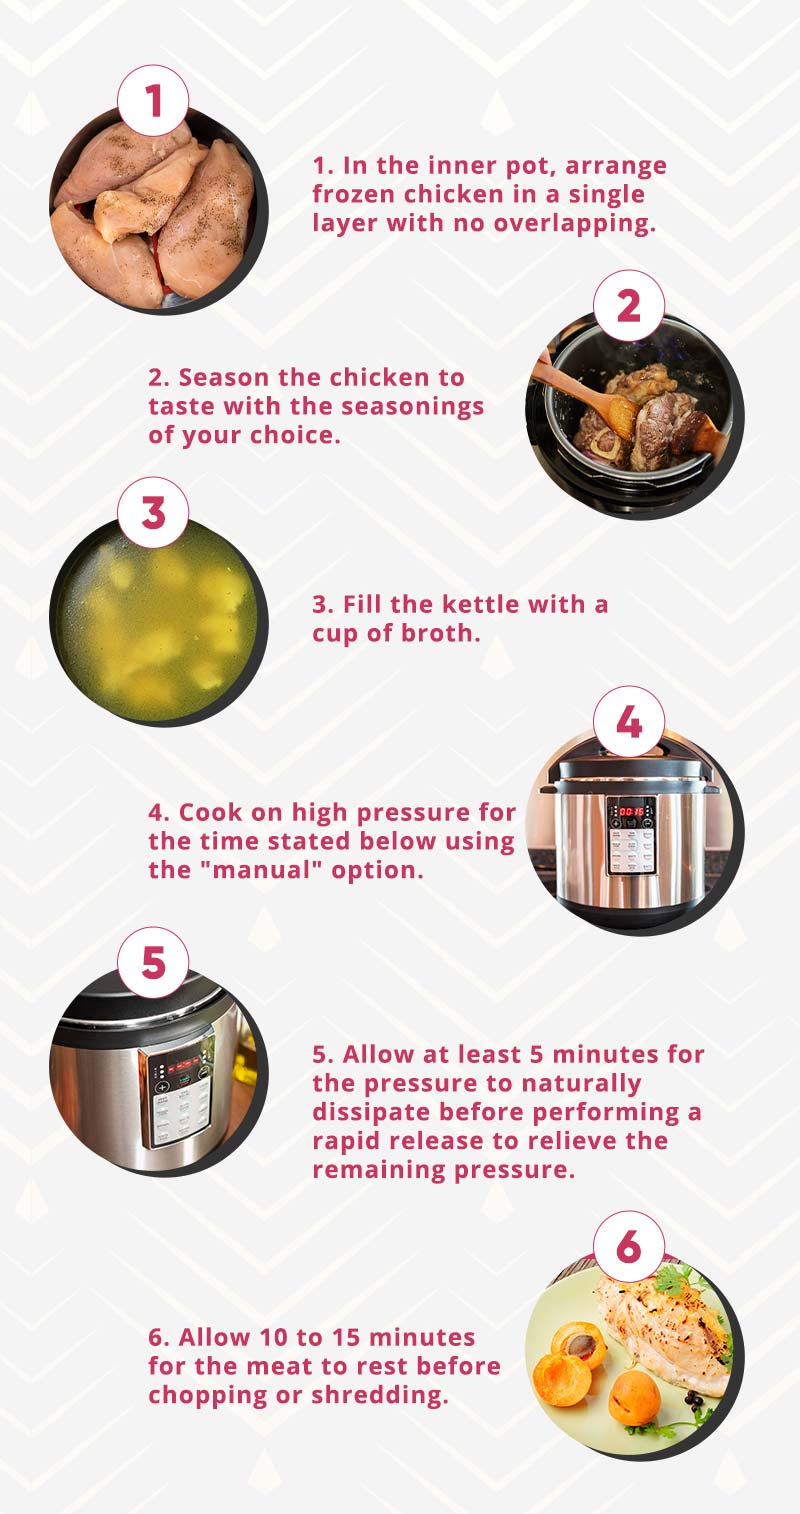 The air fryer functions as a small heat source